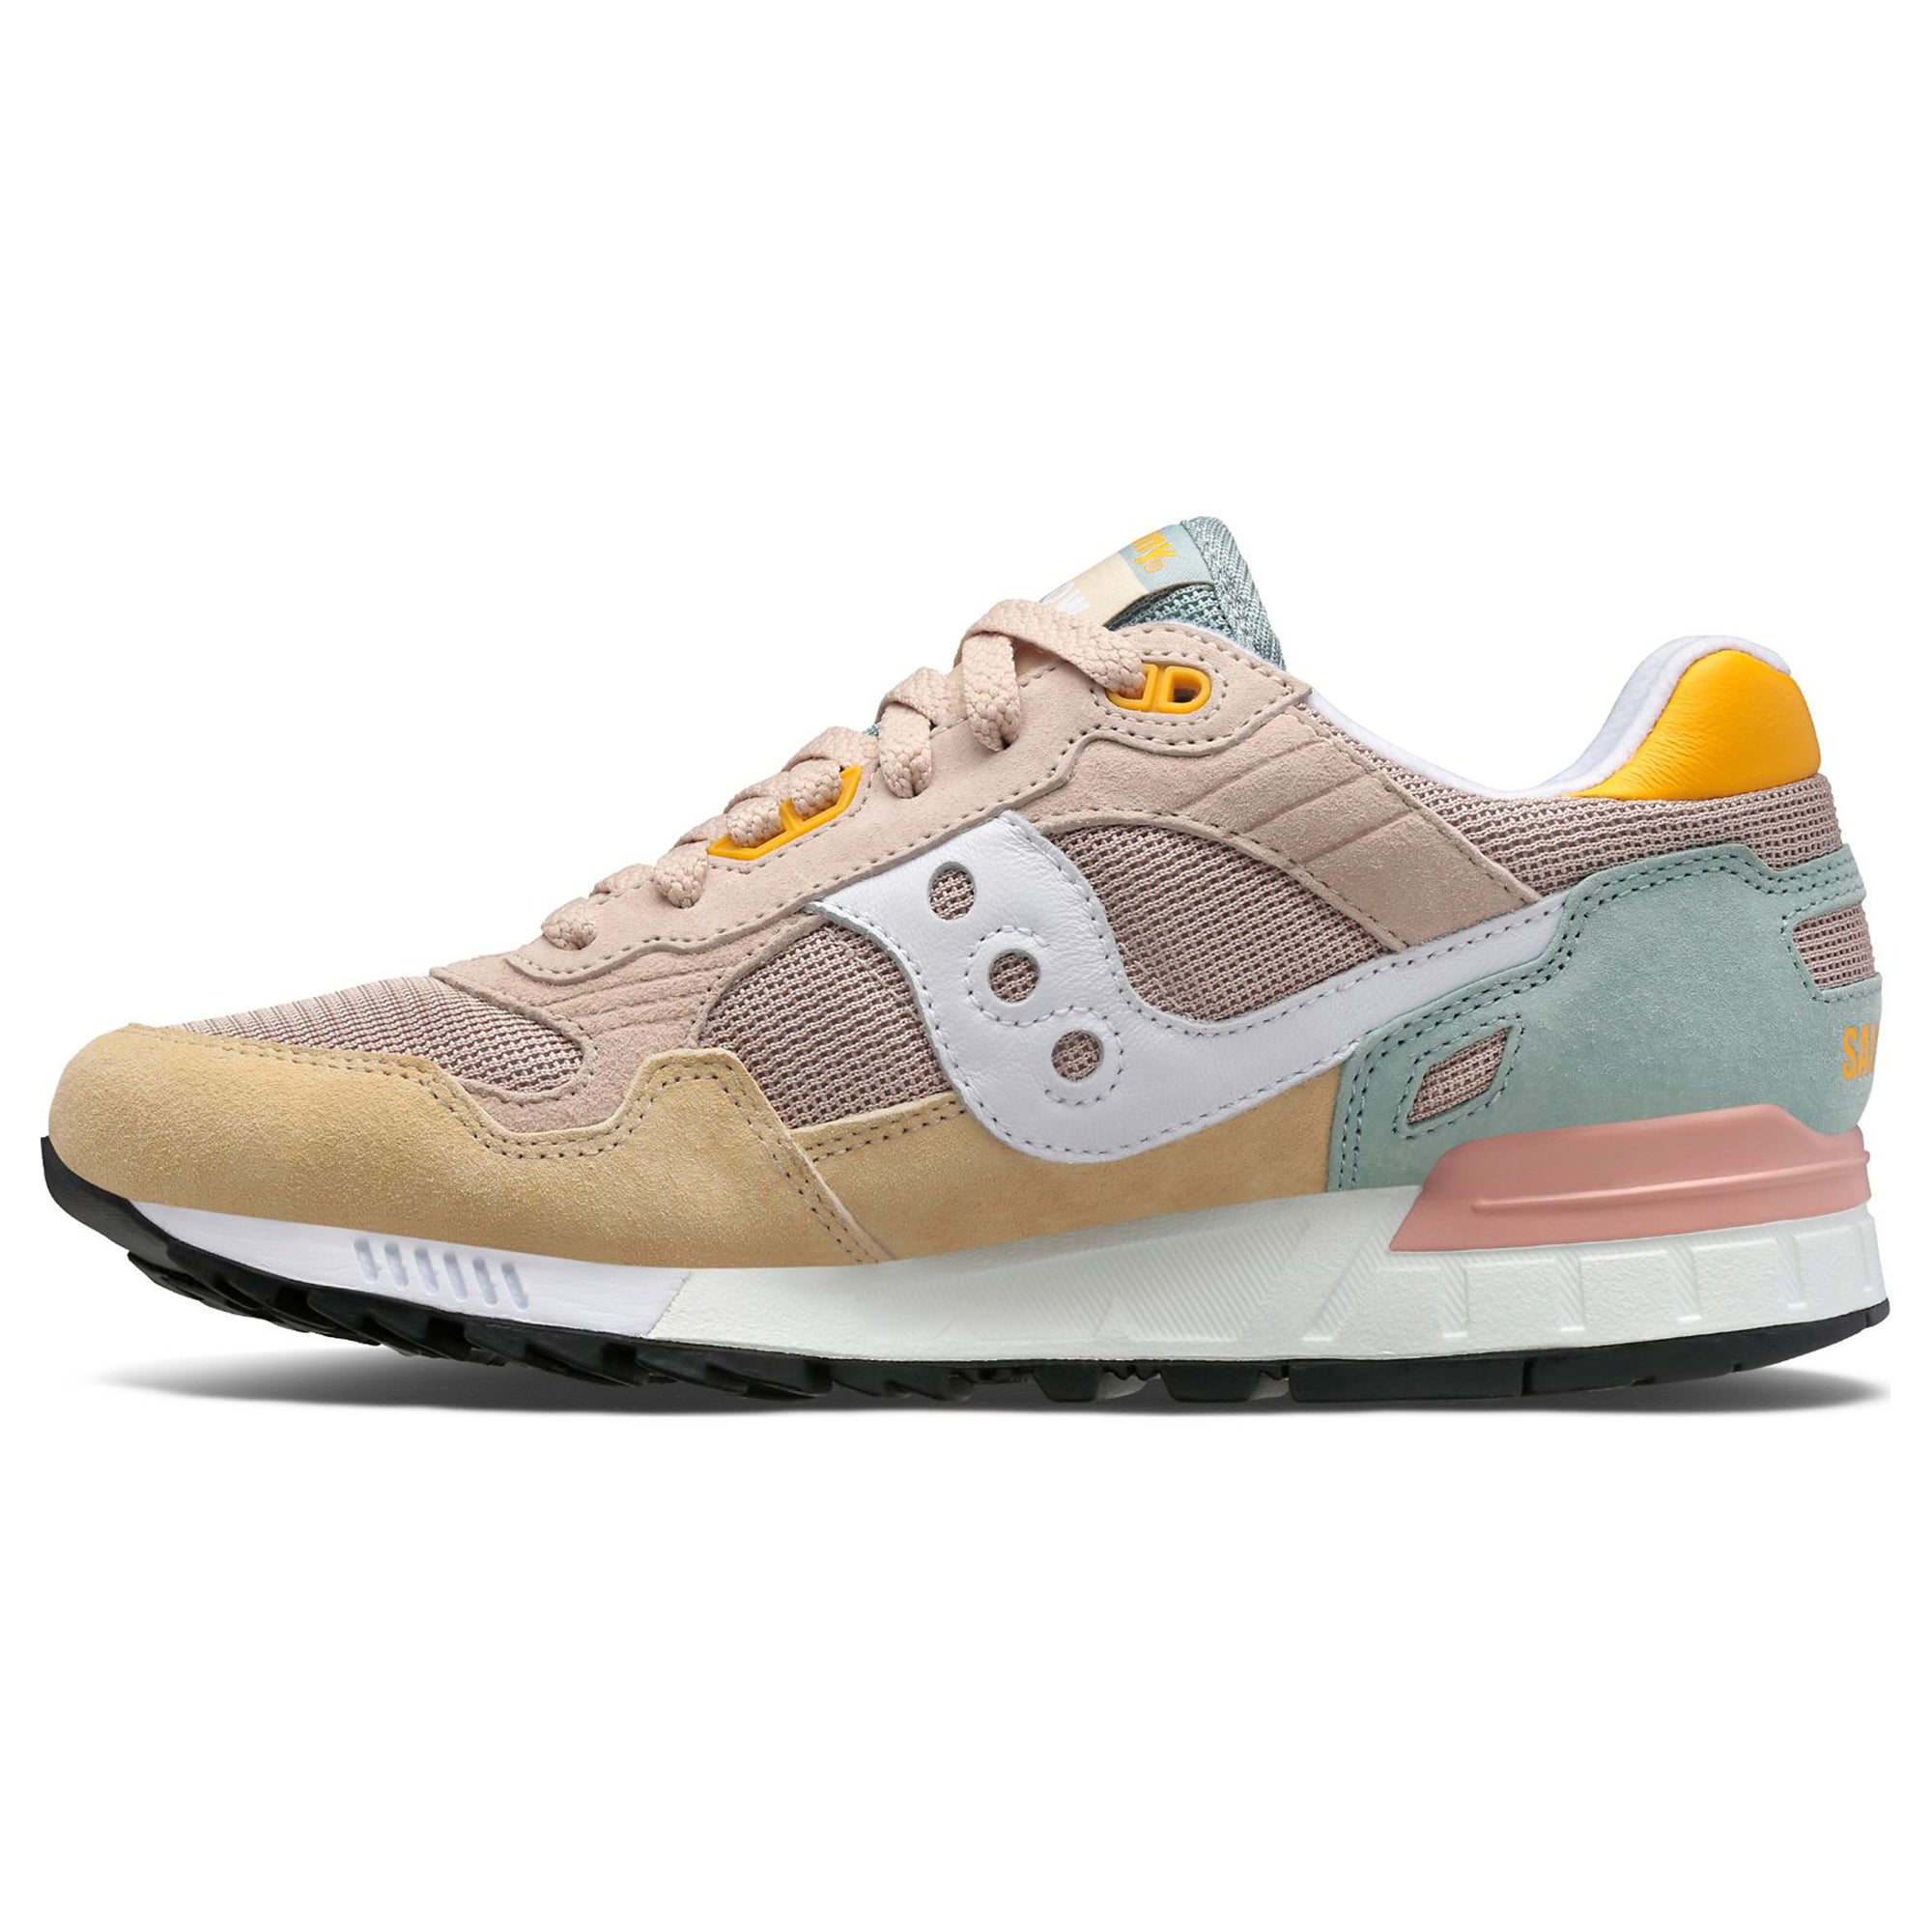 Saucony Shadow 5000 Pastel Trainers - White/Beige